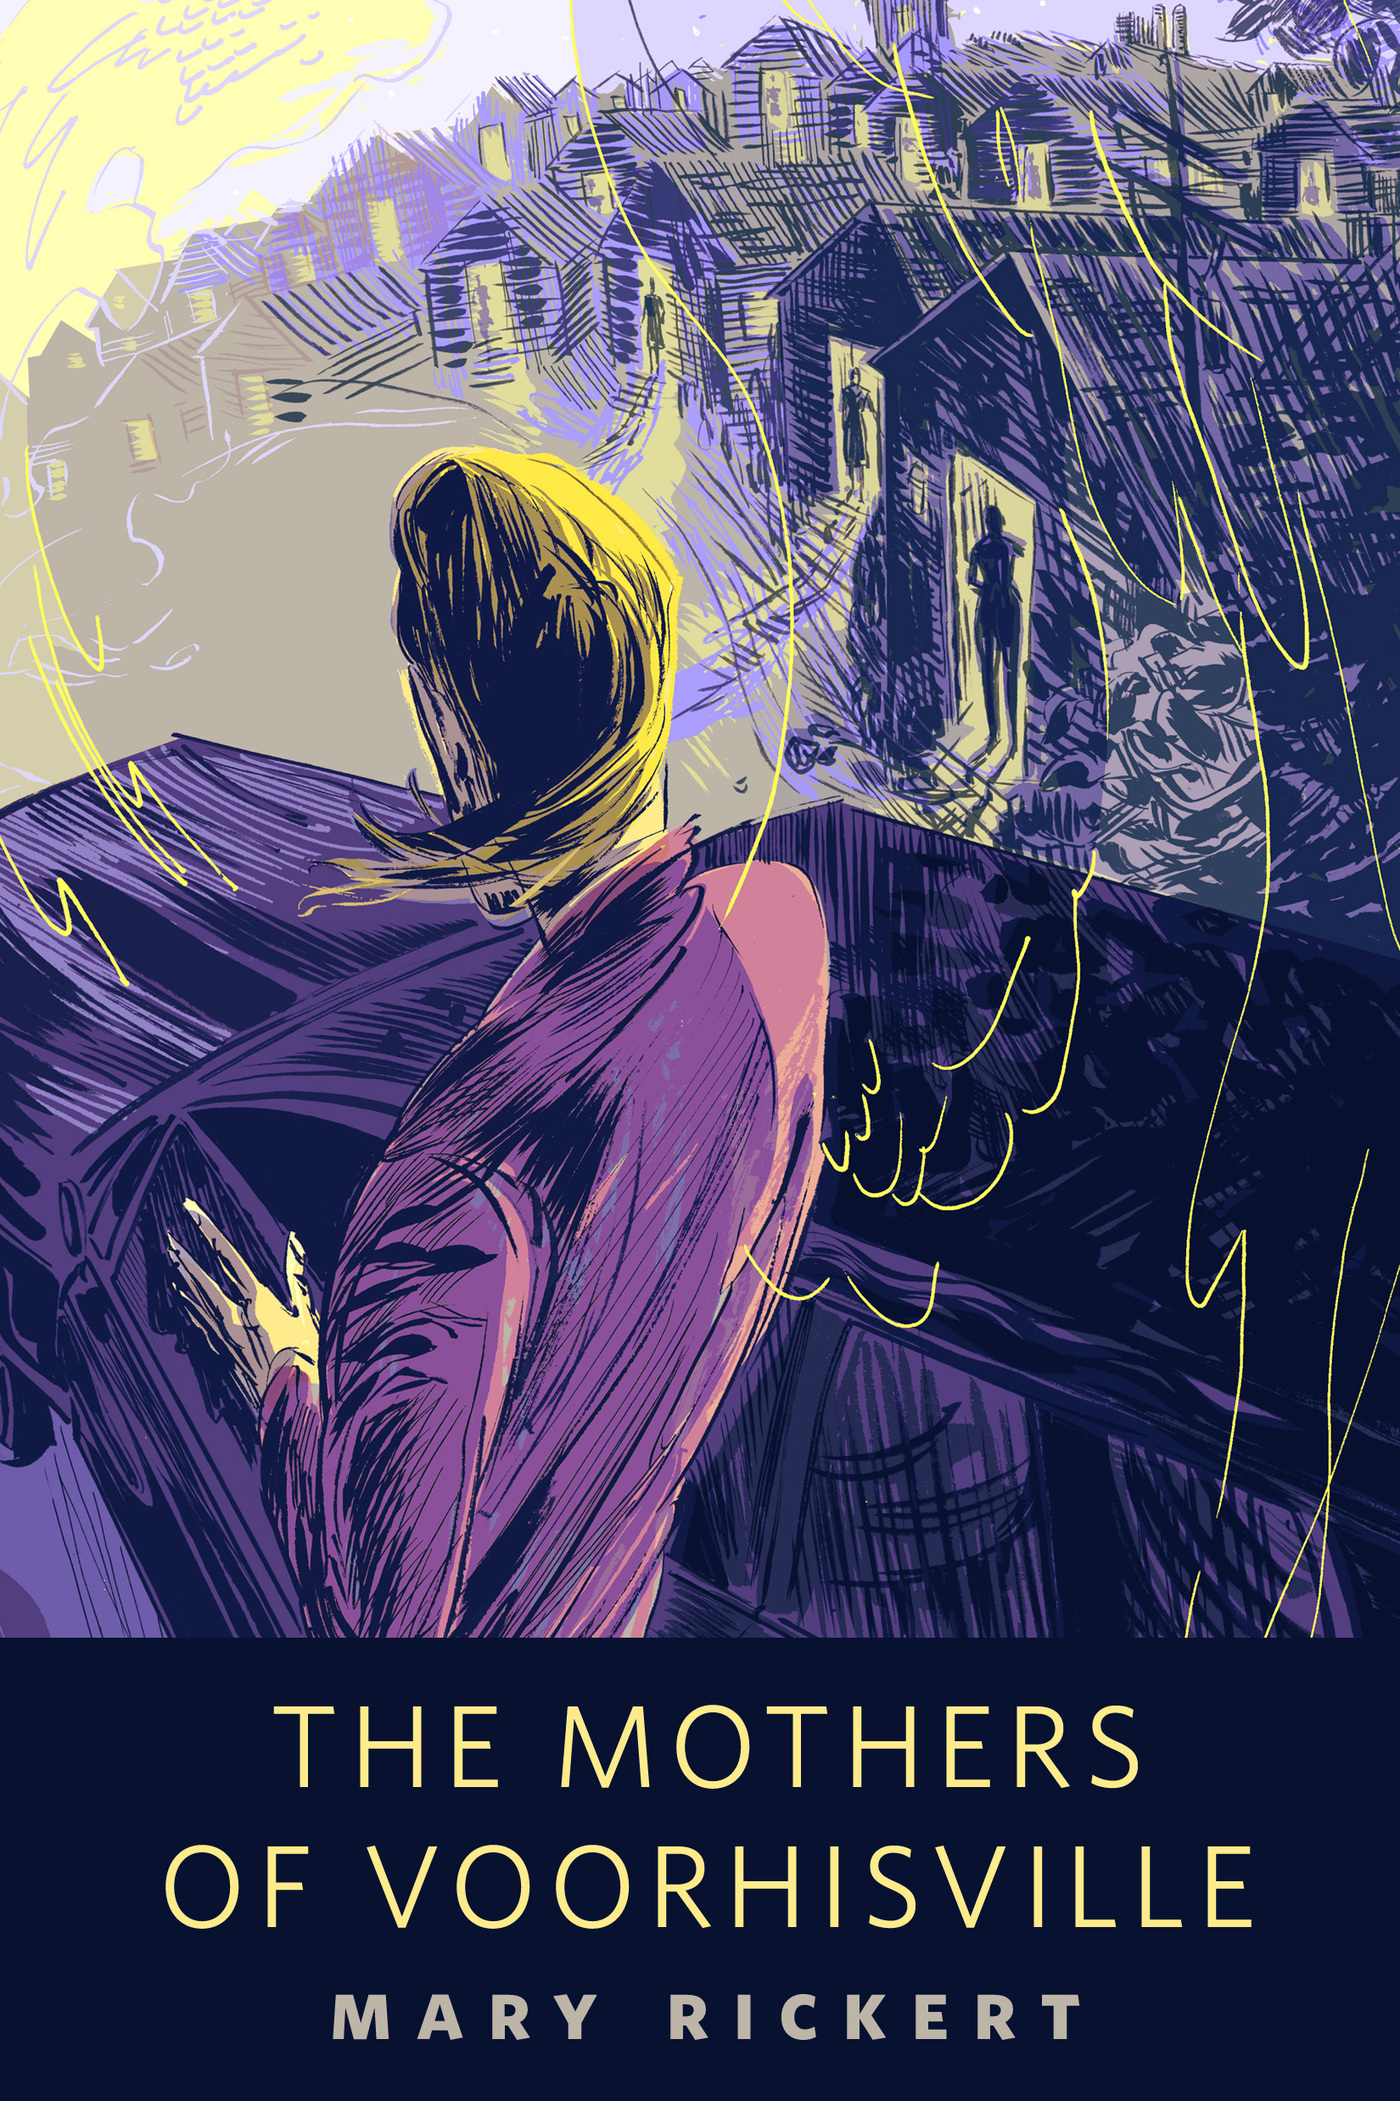 The Mothers of Voorhisville : A Tor.Com Original by Mary Rickert